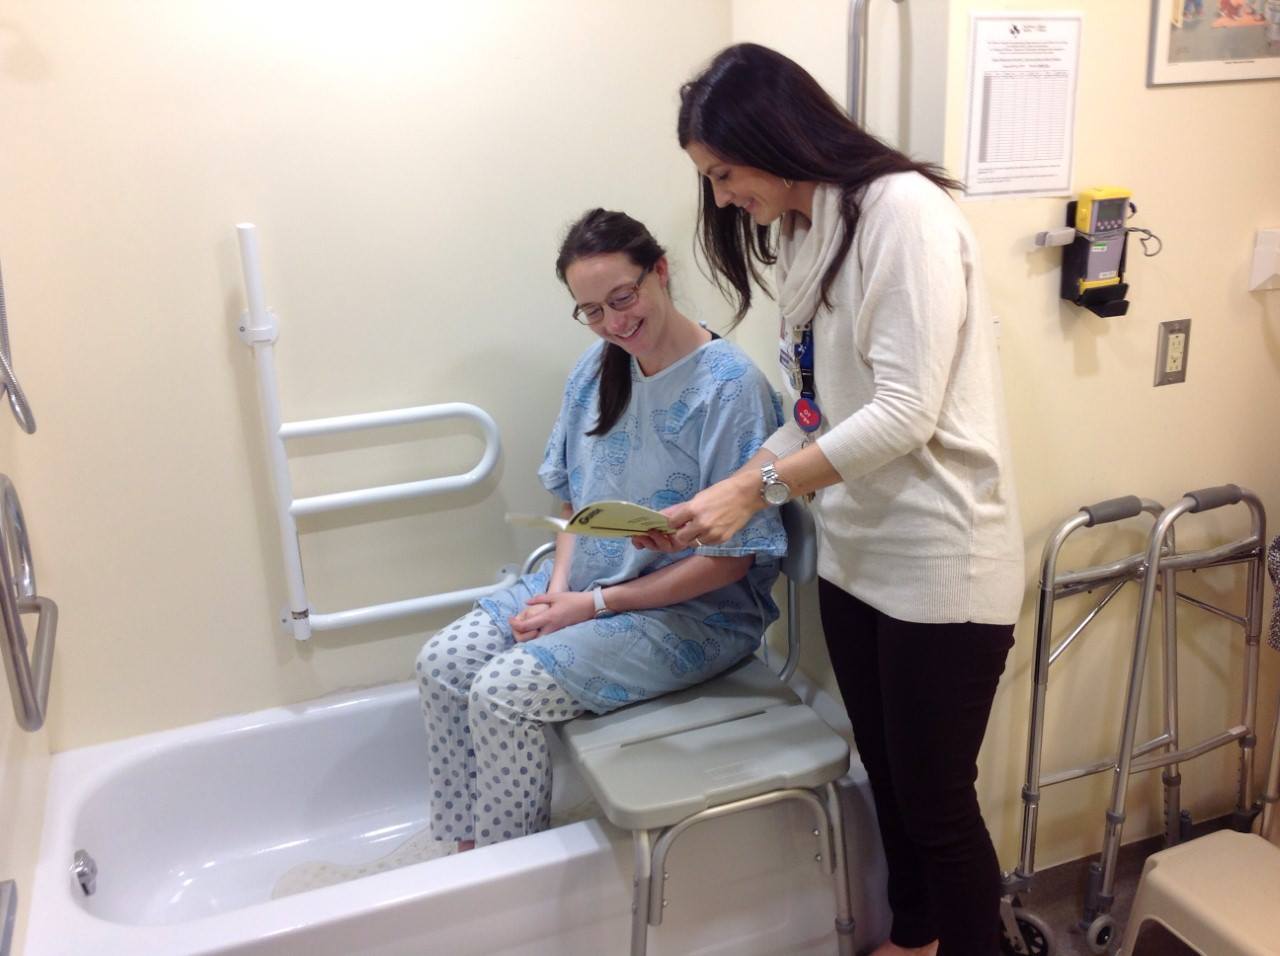 Patient sits on stool in bathtub as health care provider reads to them from a booklet